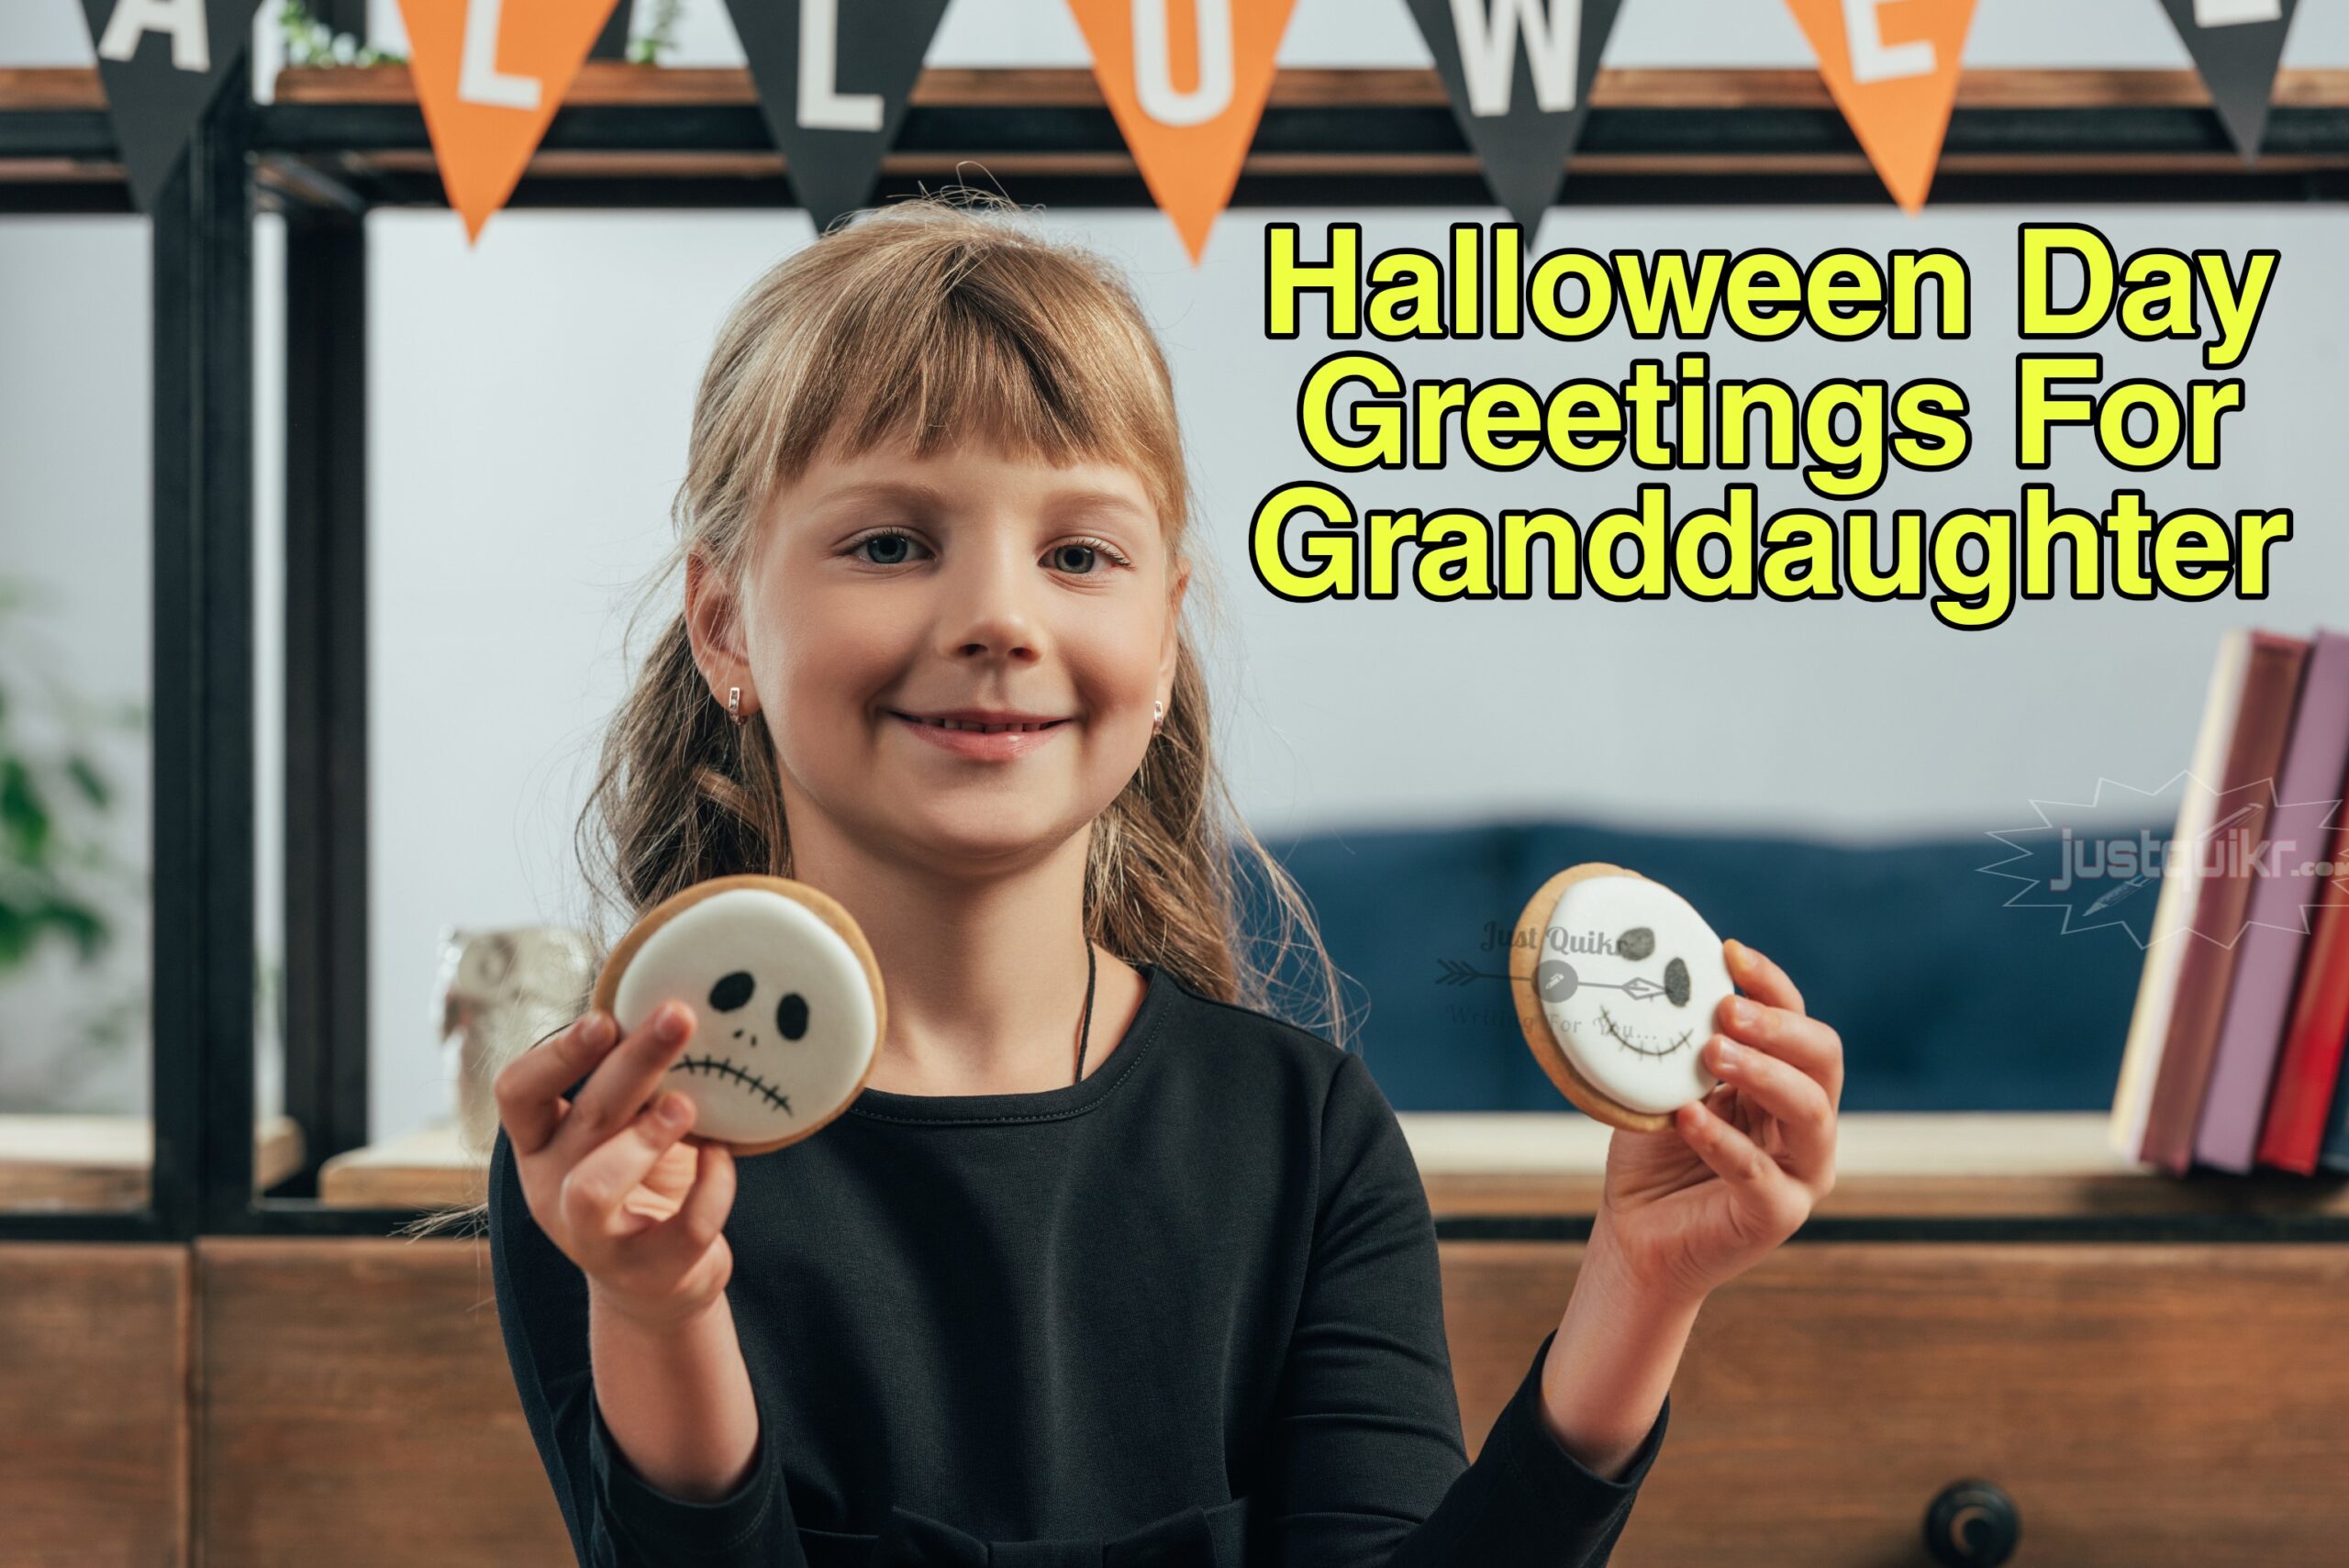 Halloween Day Greetings For Granddaughter